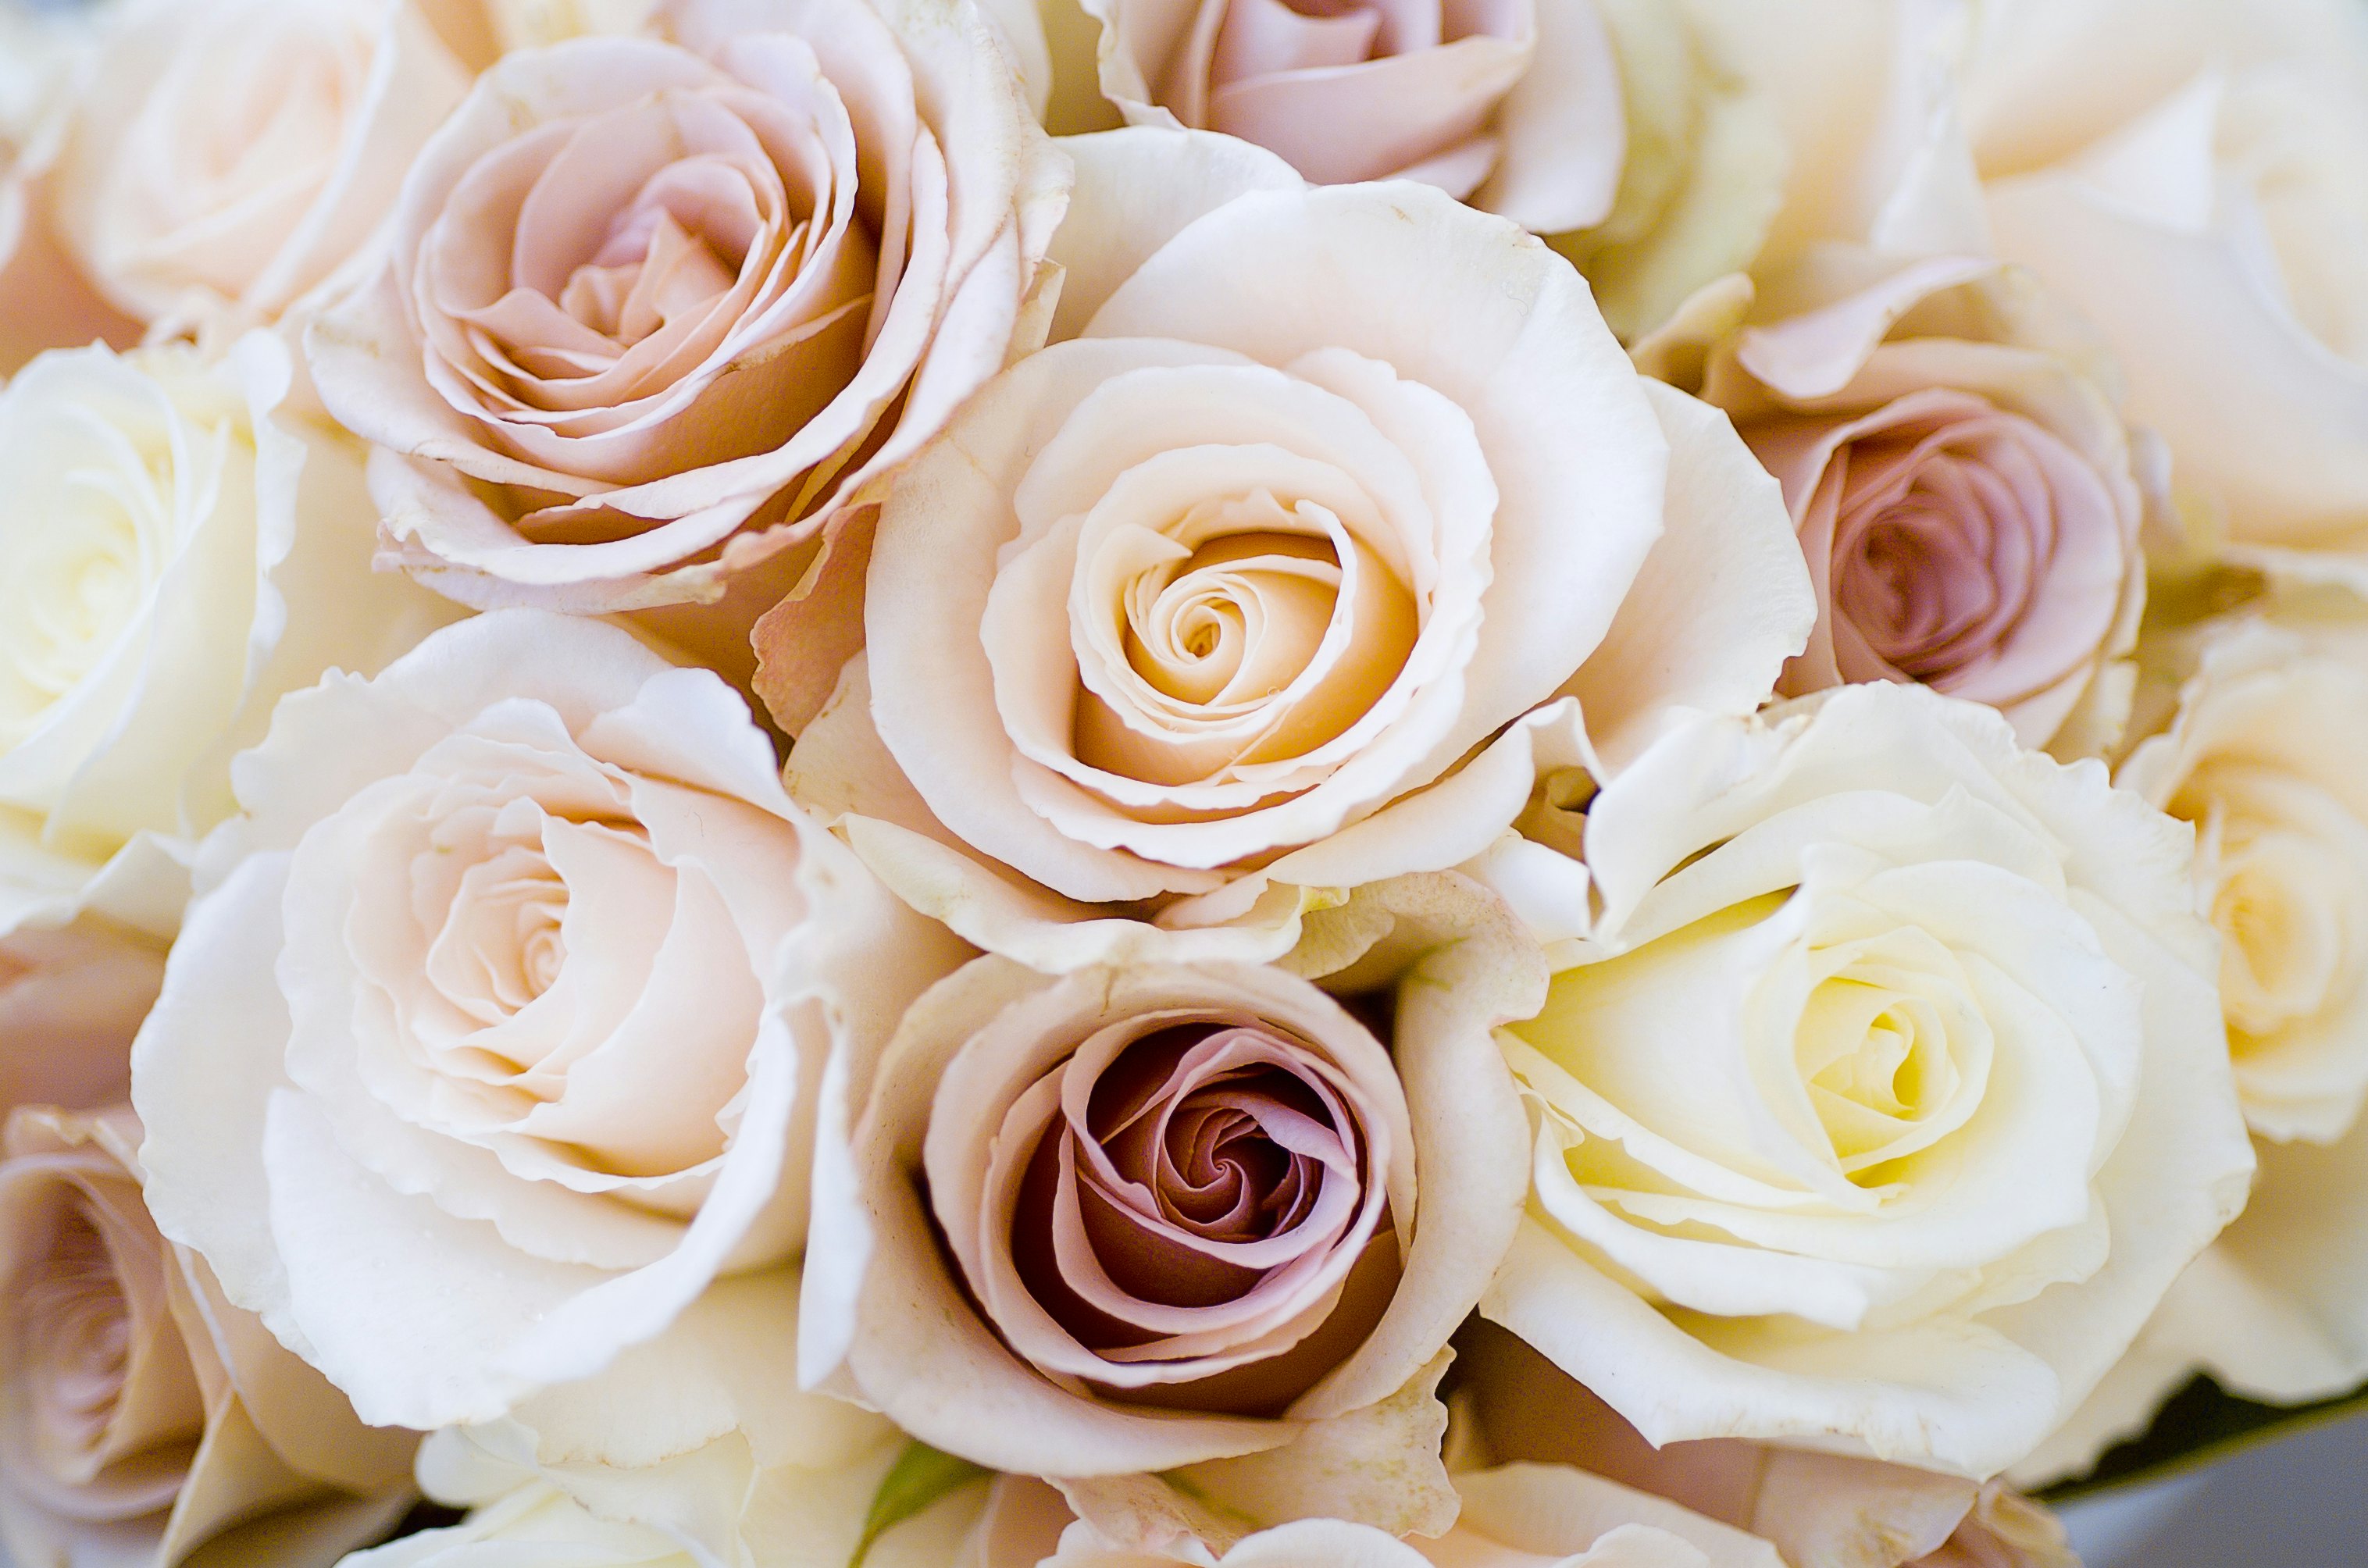 where to get flowers for wedding